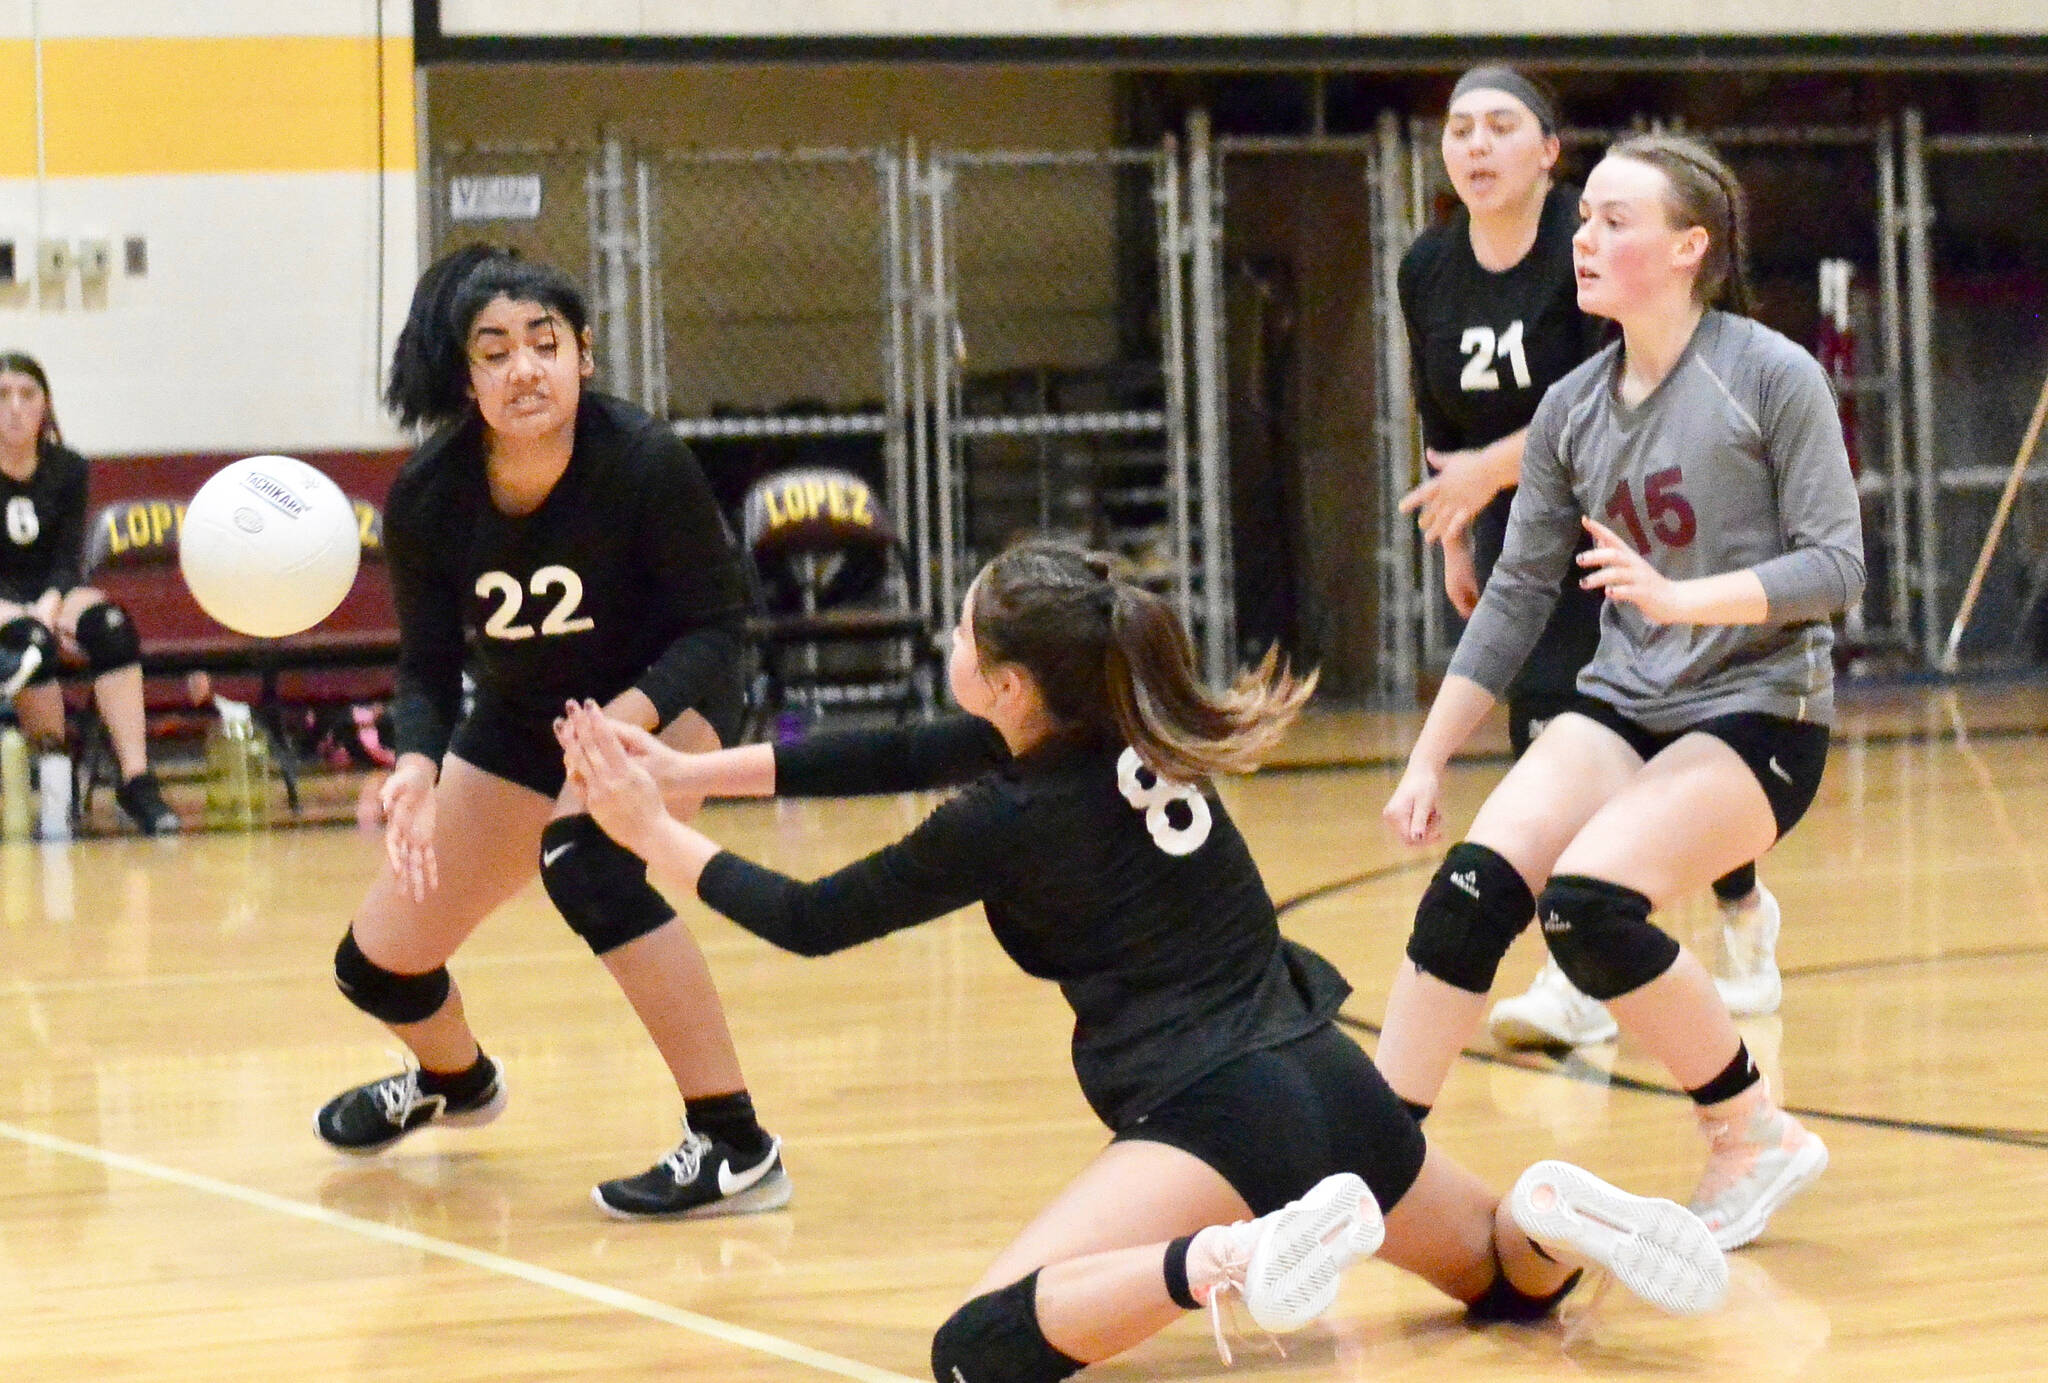 Gene Helfman/Contributed photo
Seniors Valentina Rendon (22), Jamie Armstrong (8), and Lolo Meissner (15) converge on a ball that found a gap while Amelia Patino (21) watches. Lopez swept Shoreline Christian 3-0 in the Sept. 30th match.